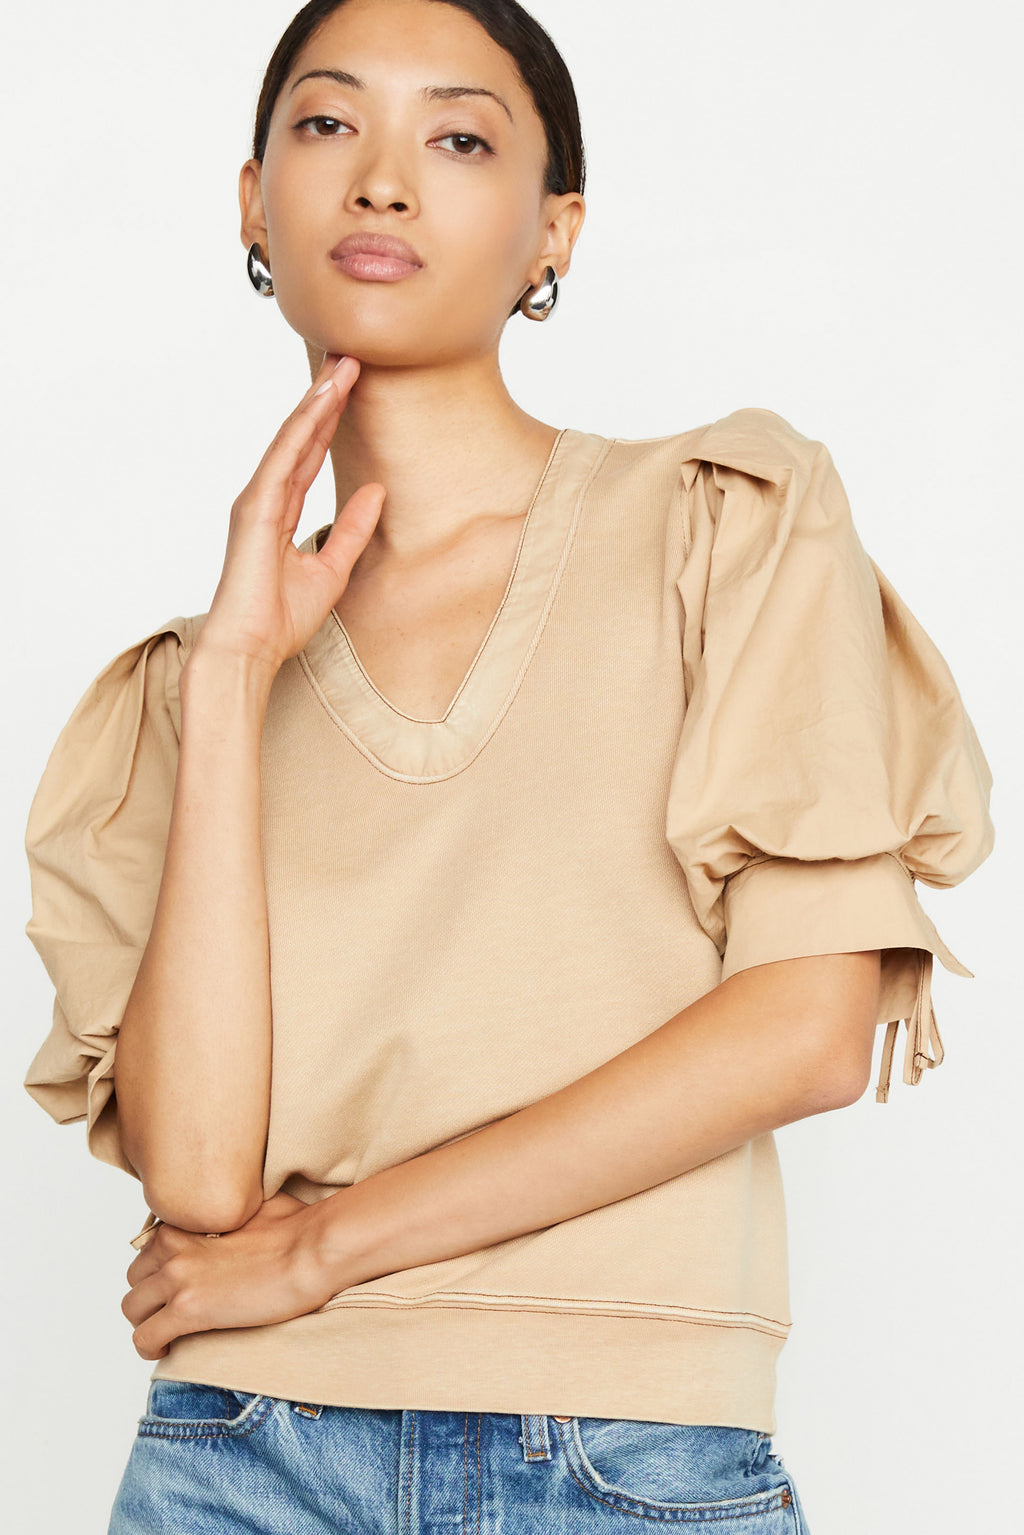 Beige short sleeve top with a straight silhouette